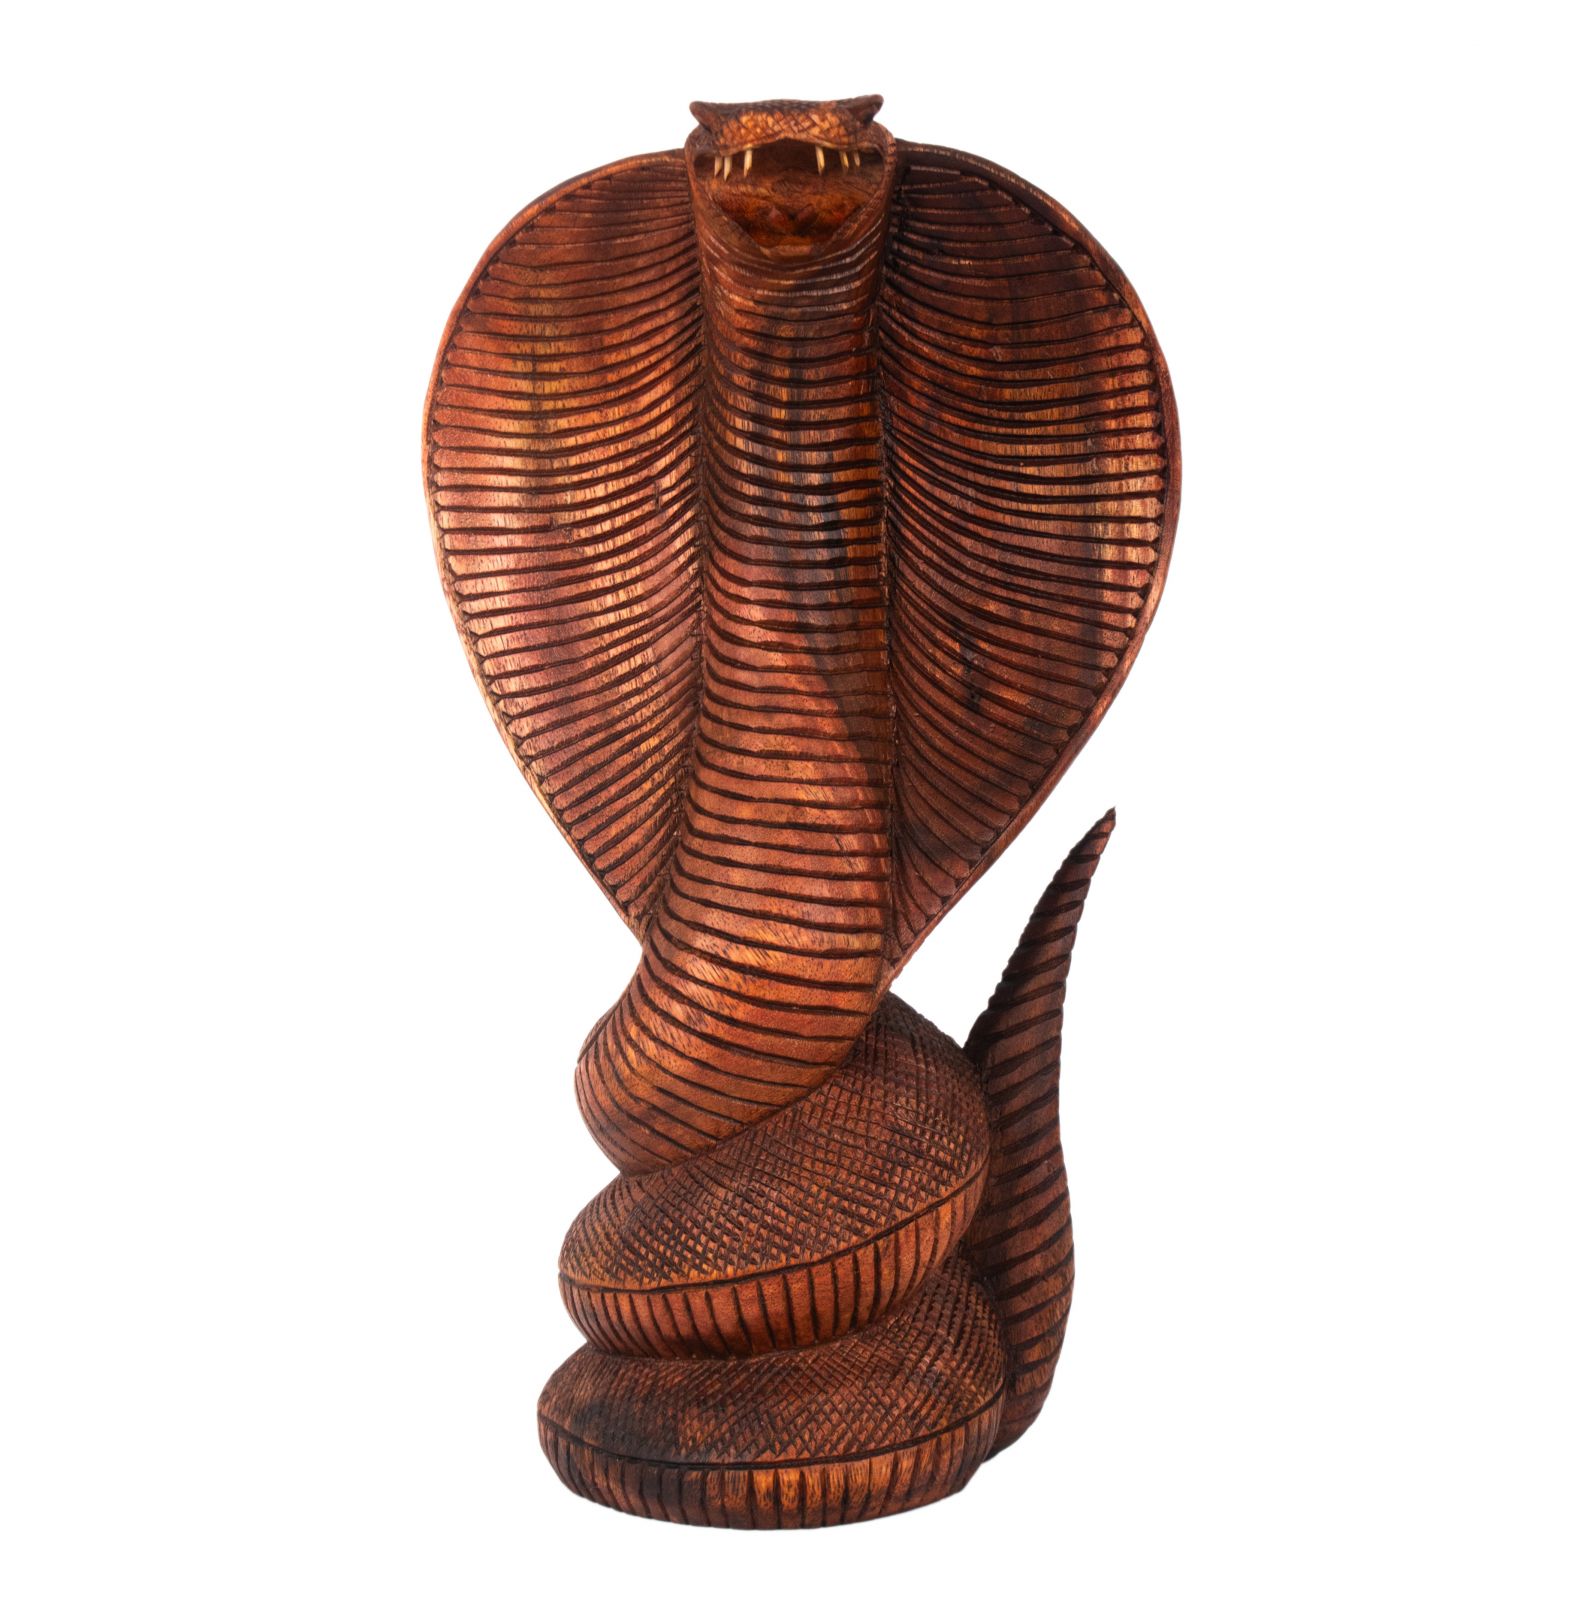 Carved wooden statue Cobra - Height 40 cm Indonesia